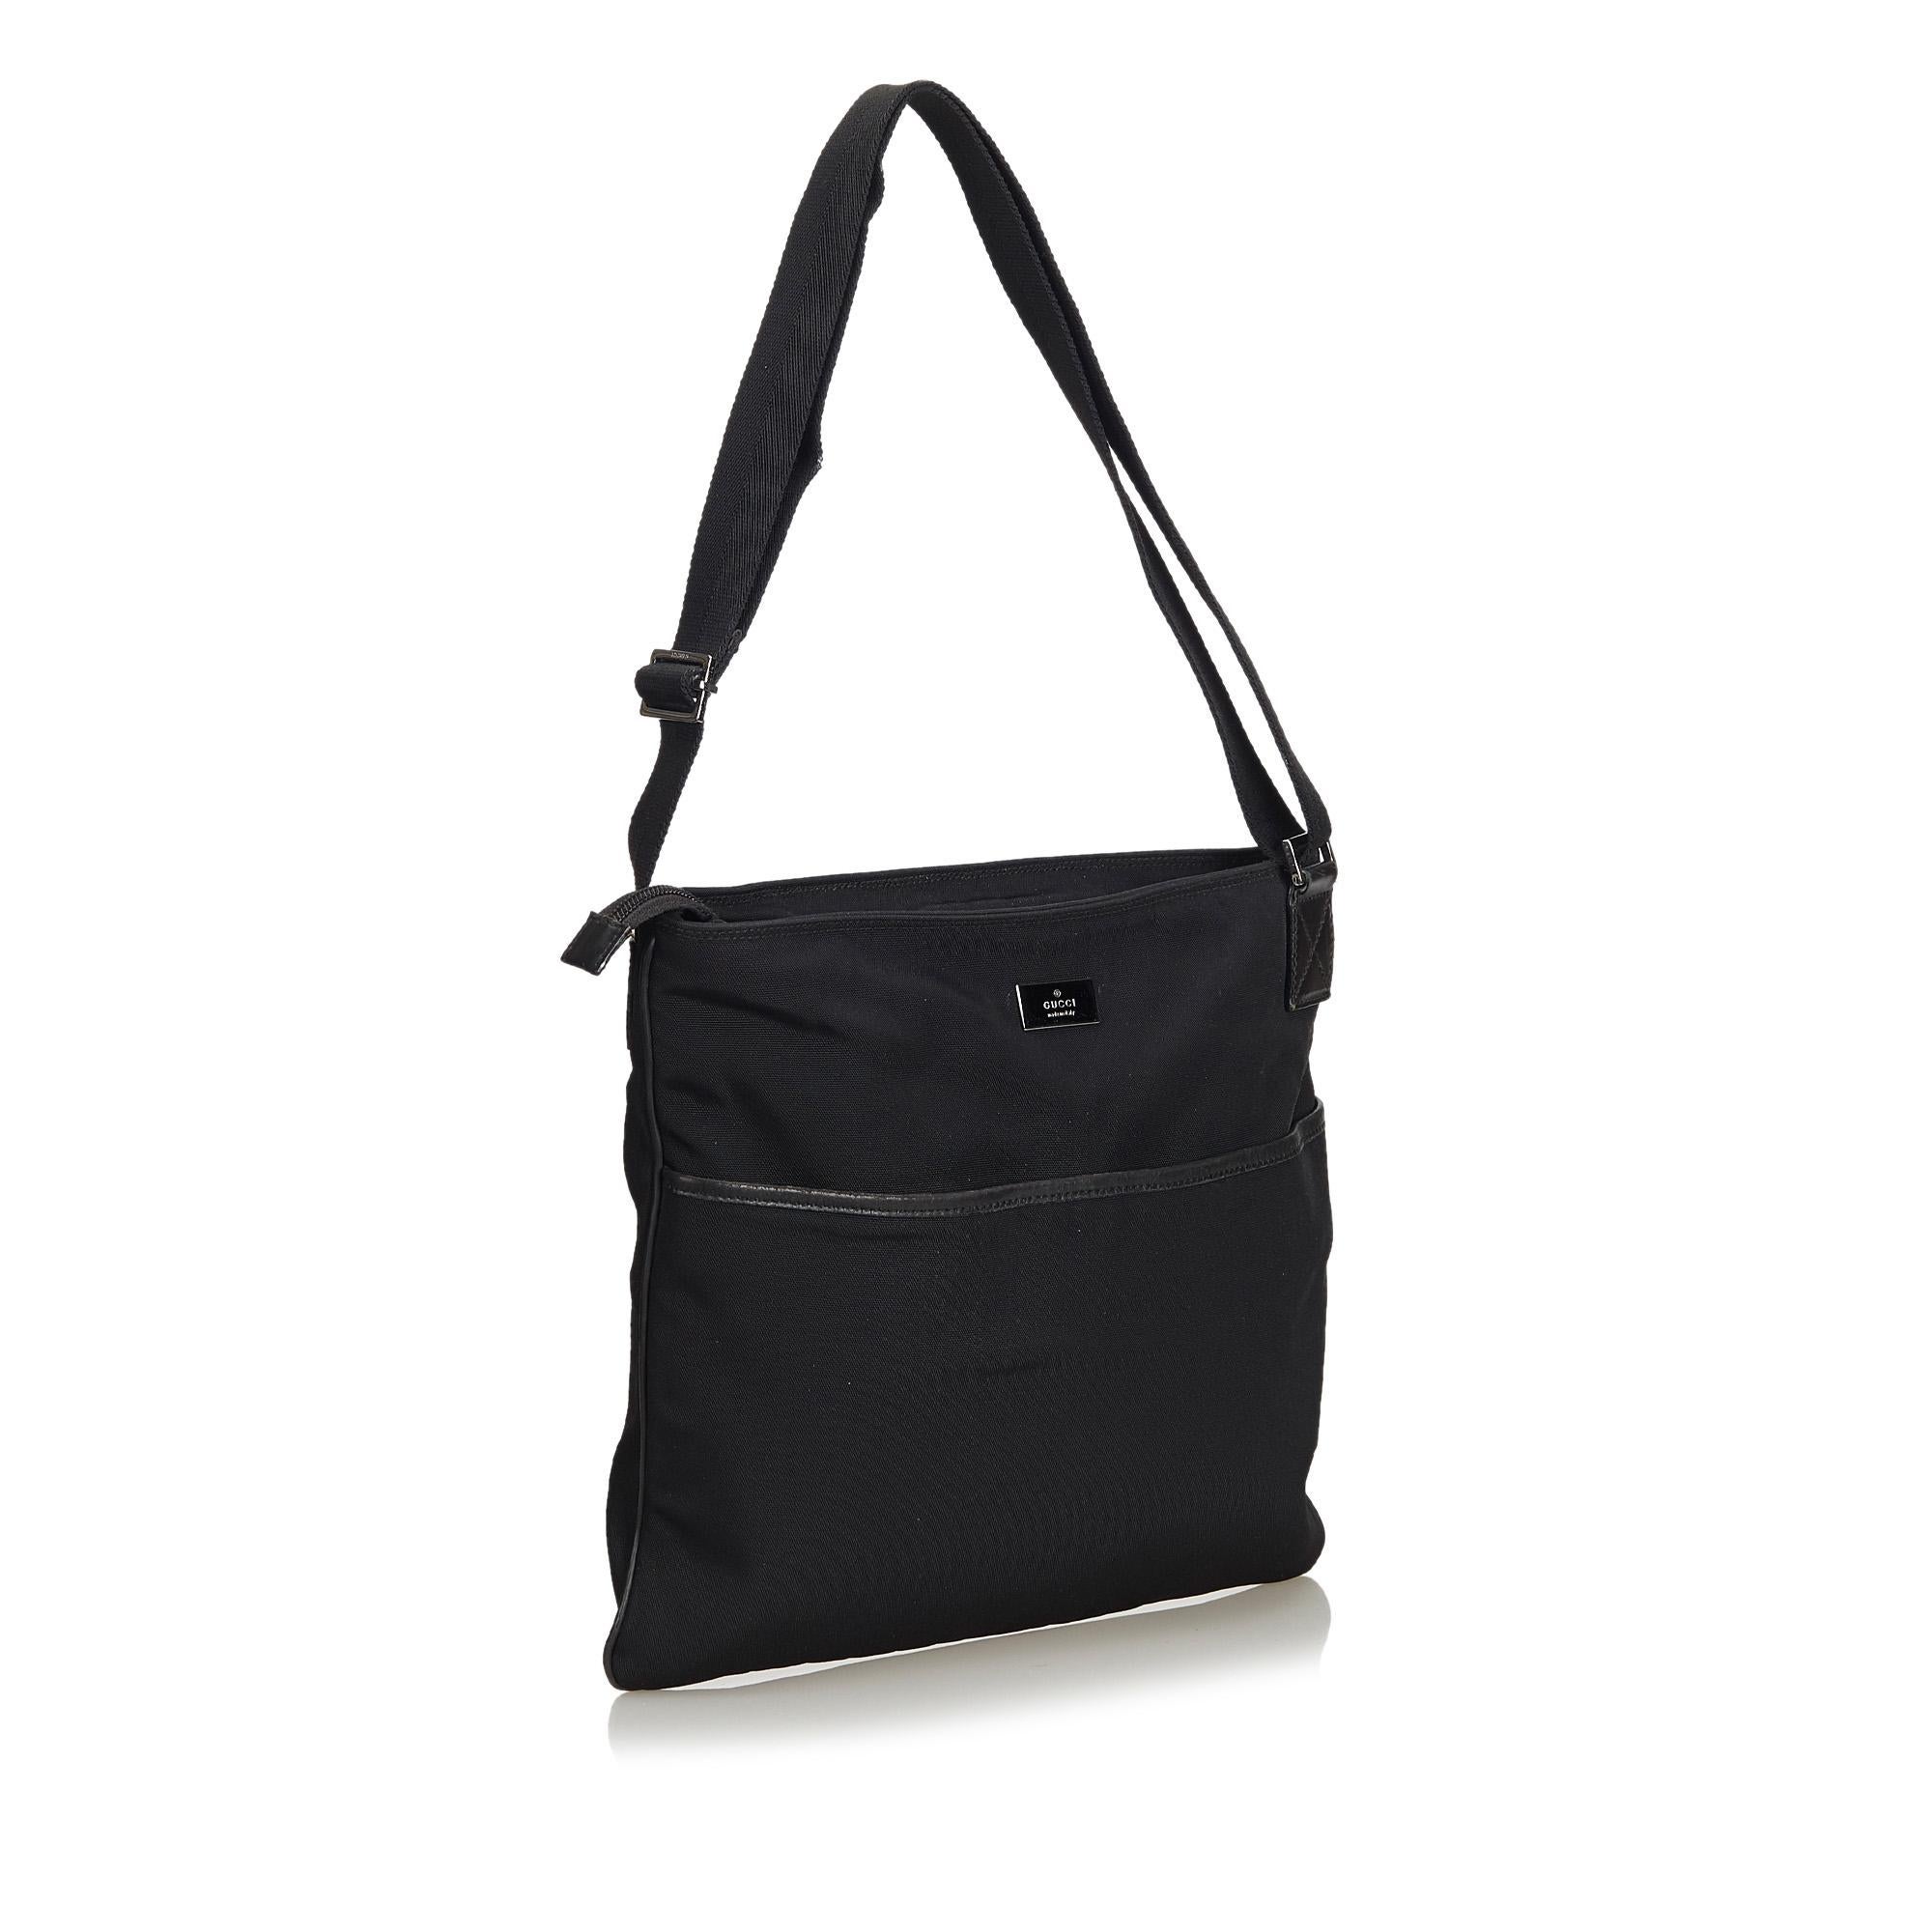 This crossbody bag features a nylon body, flat strap, top zip closure, exterior slip pocket, and an interior zip pocket. It carries as AB condition rating.

Inclusions: 
This item does not come with inclusions.

Dimensions:
Length: 29.00 cm
Width: